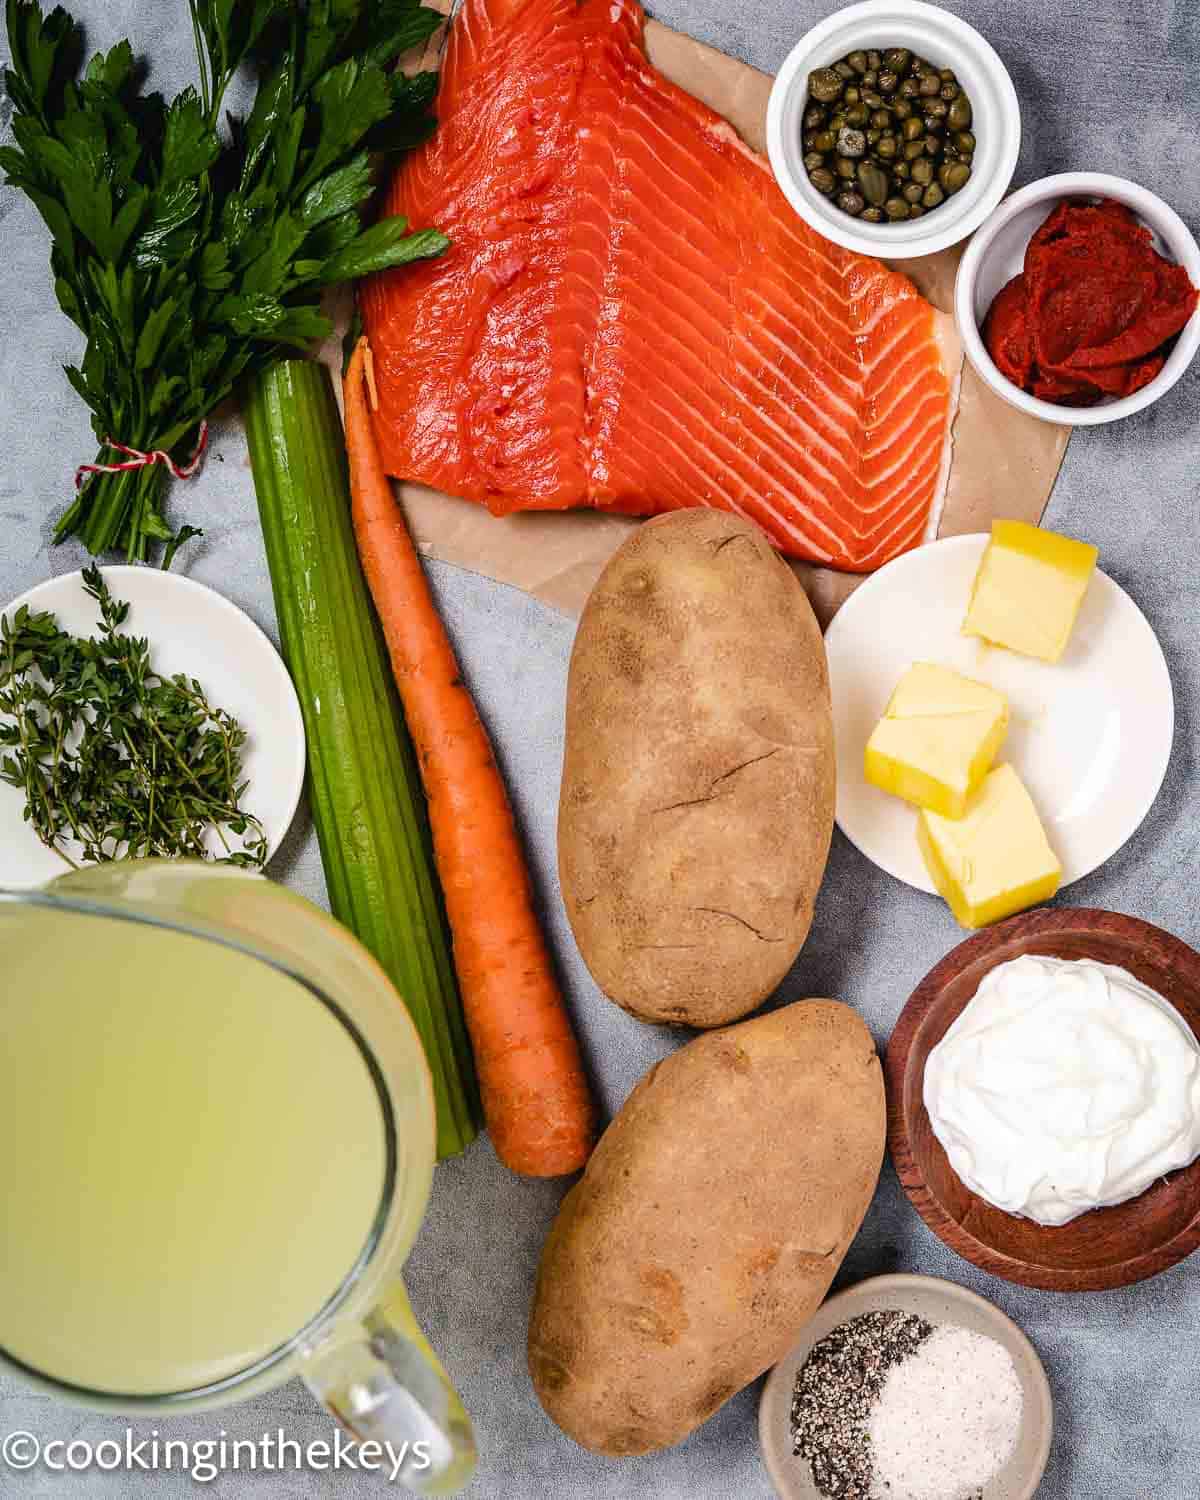 Salmon, potato, carrot, celery, seafood stock butter, parsley, capers, seasonings for howder.